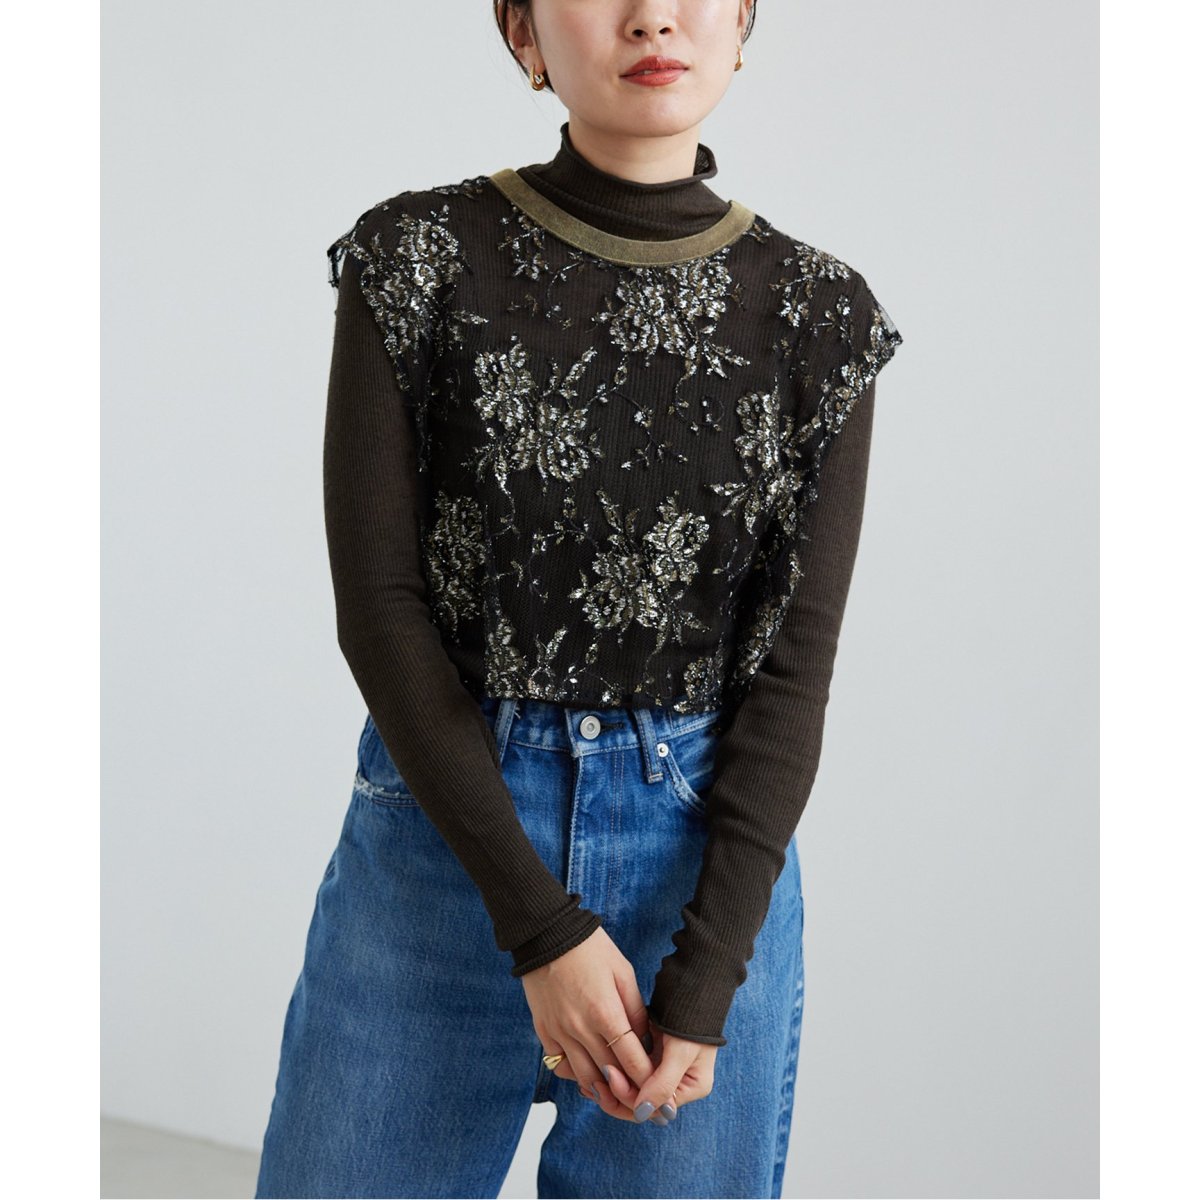 MARGE/マージ】LACE SHORT GILLET / レースショートジレ | イエナ(IENA ...